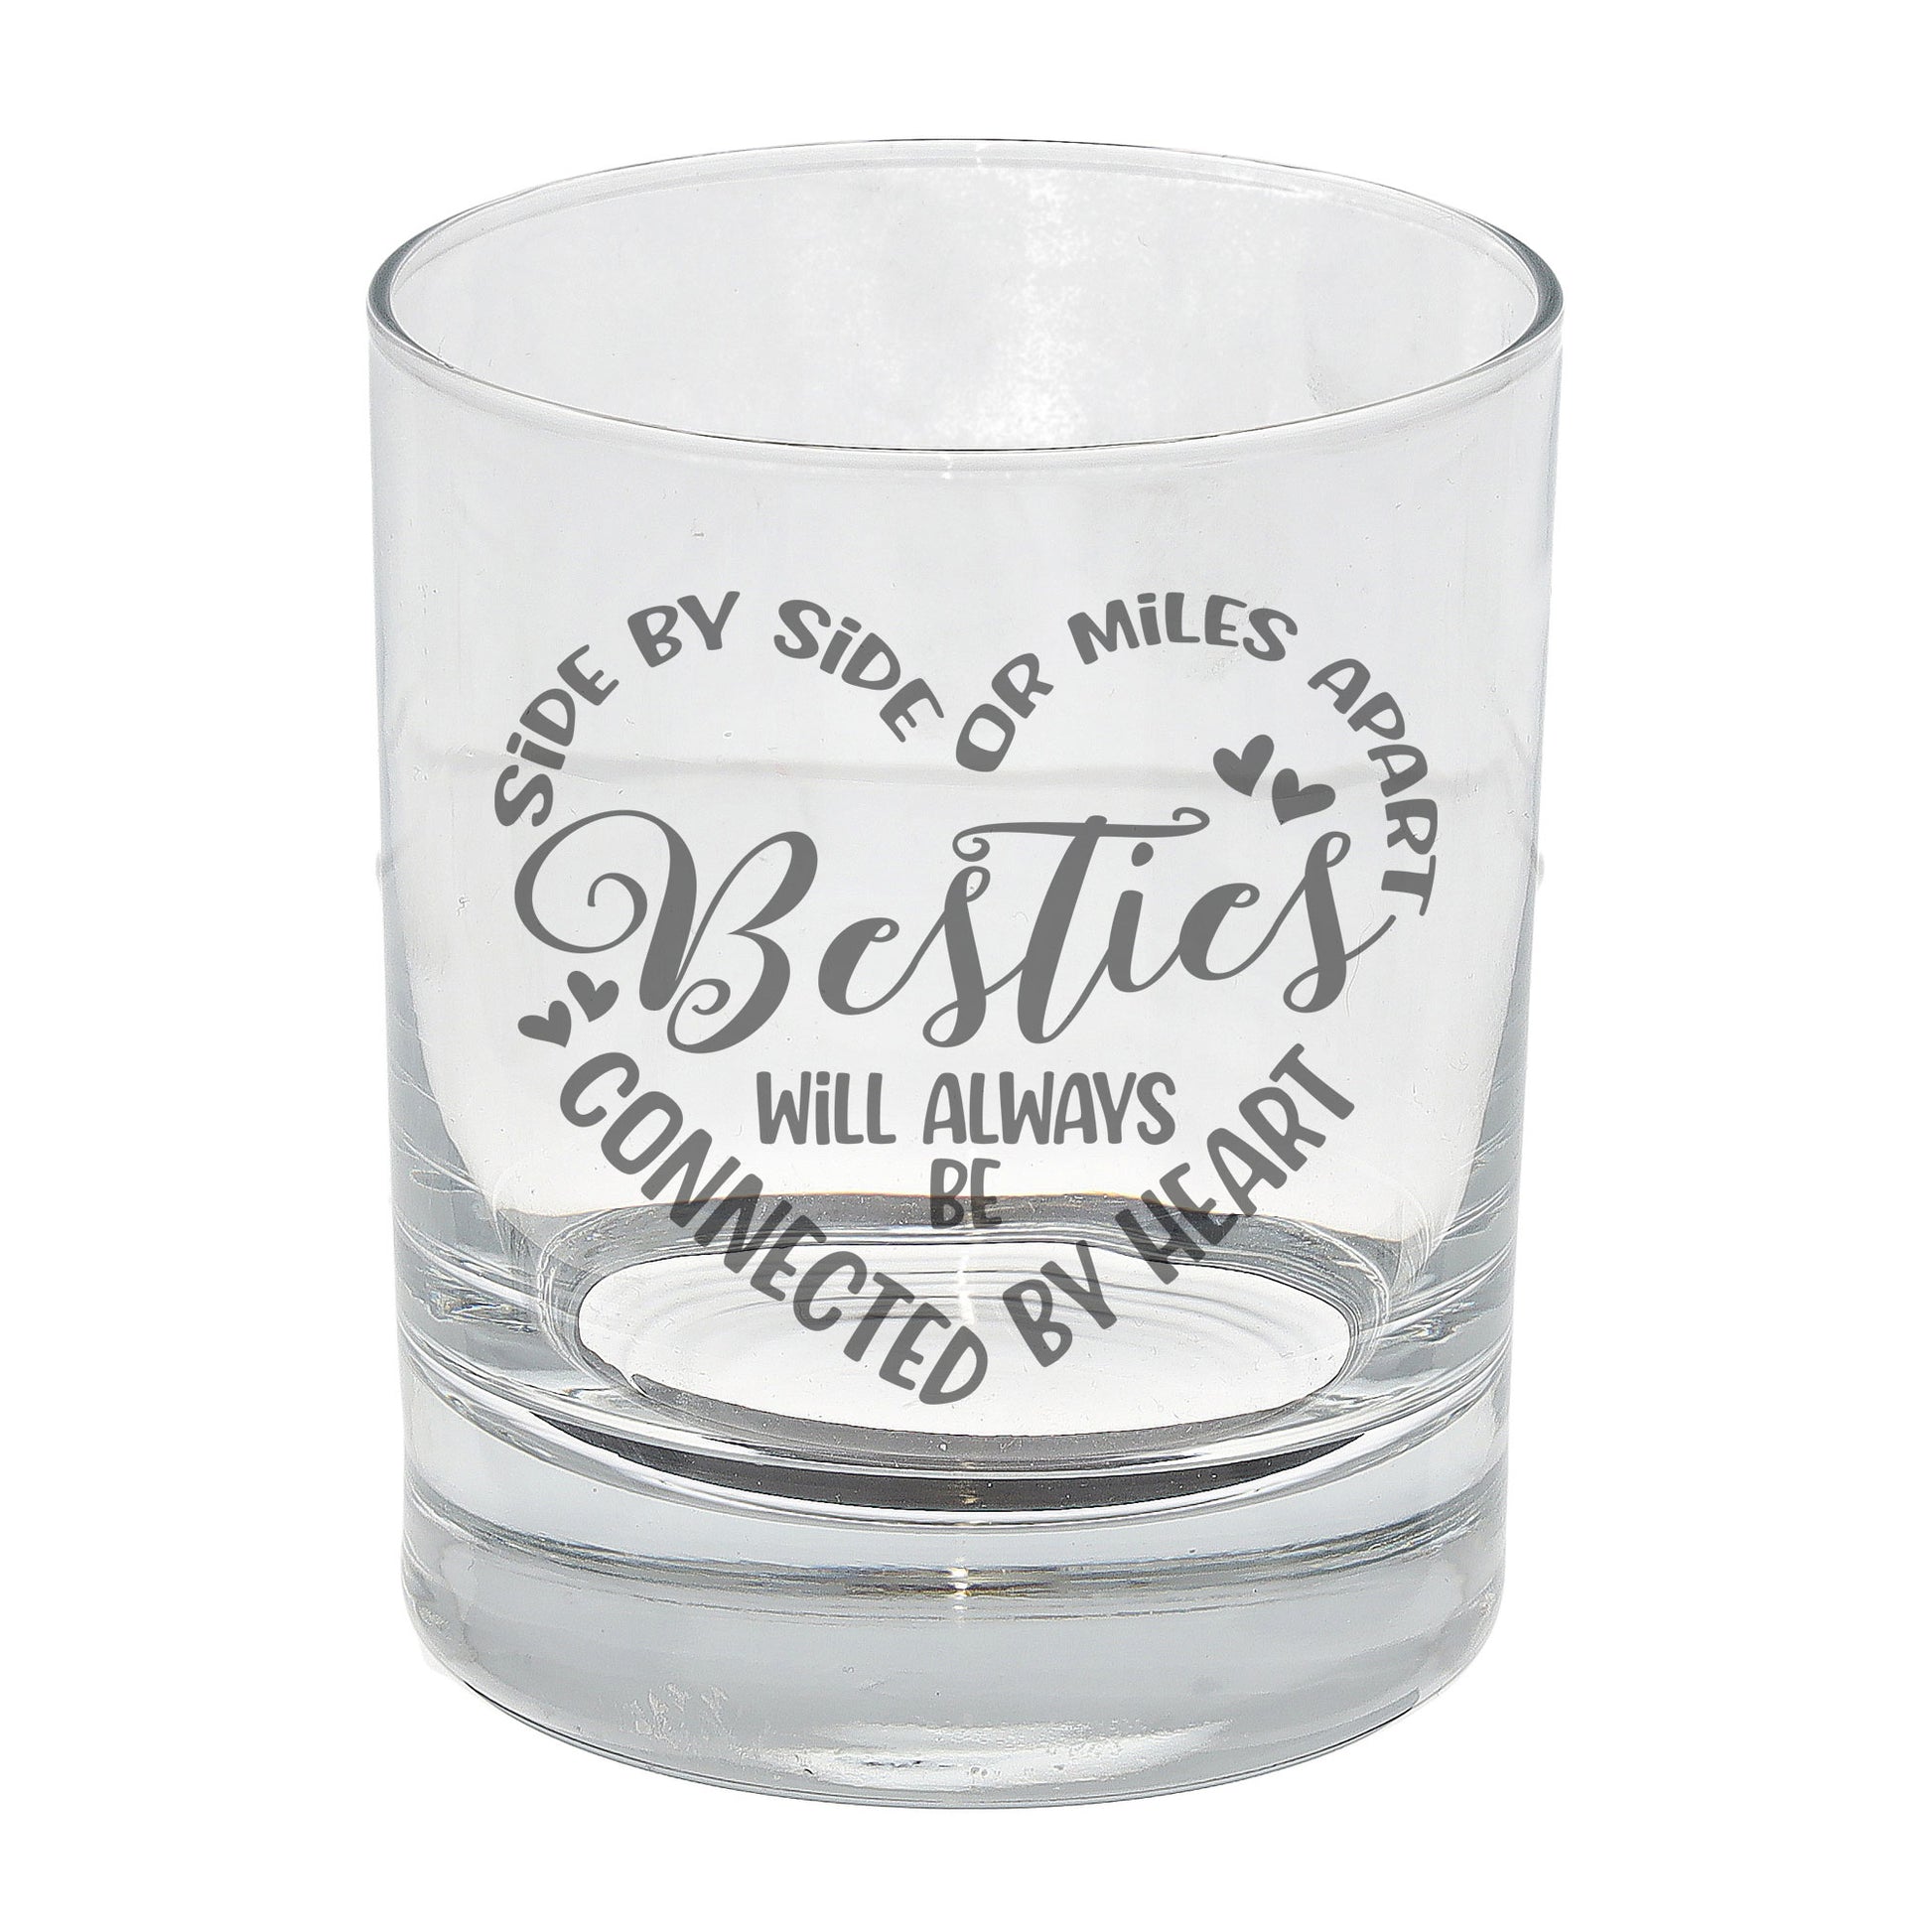 Besties Connected By Heart Engraved Whisky Glass and/or Coaster Set  - Always Looking Good - Whisky Glass Only  